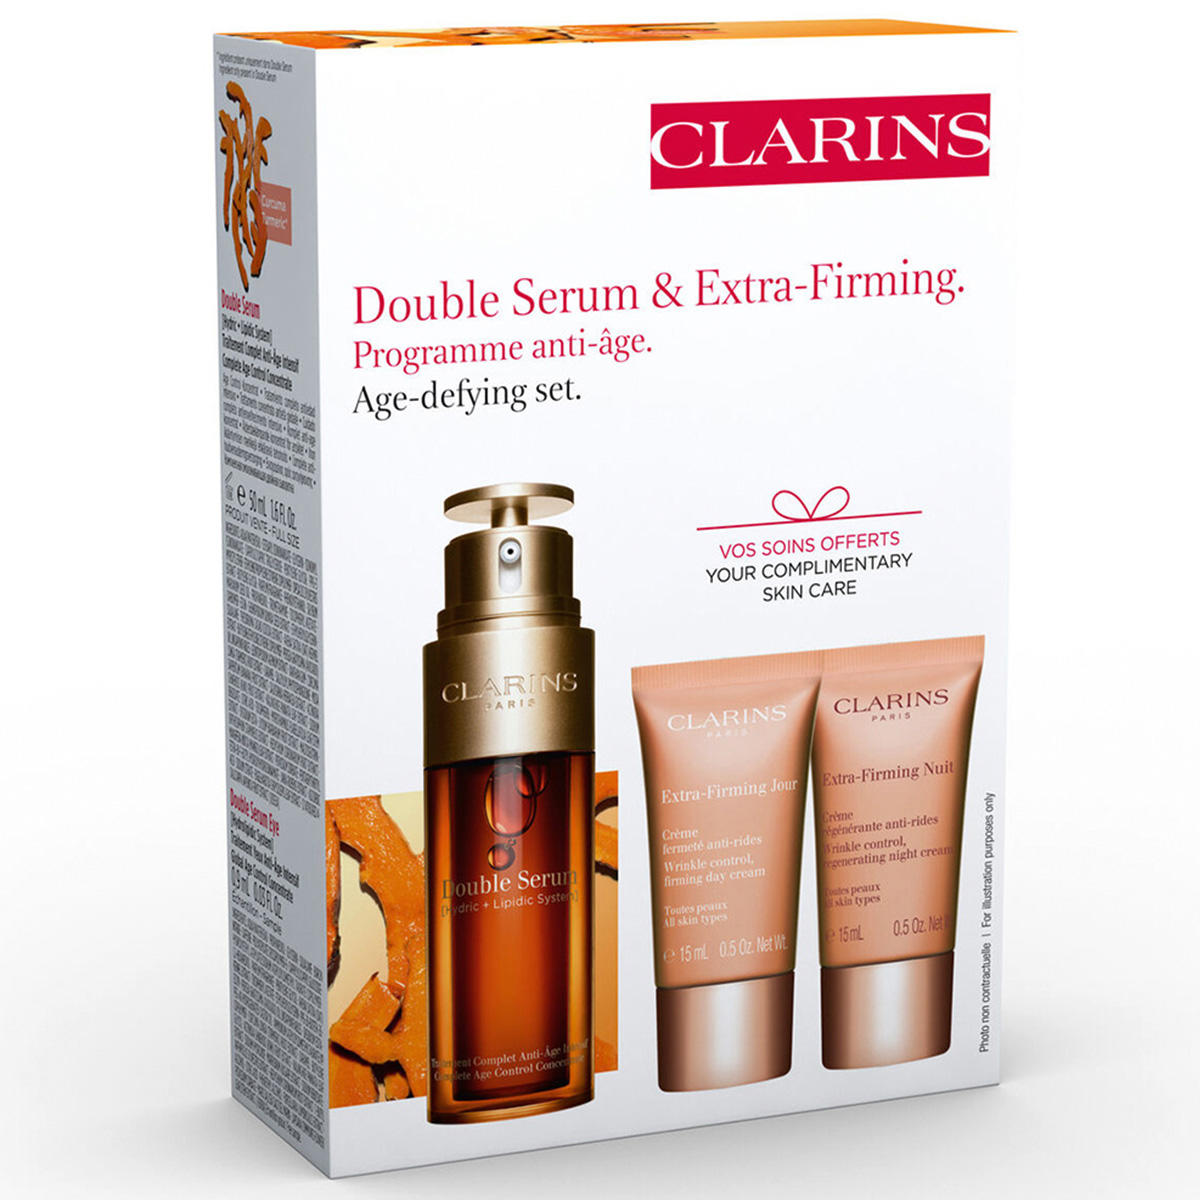 CLARINS Double Serum & Extra-Firming Set  - 2